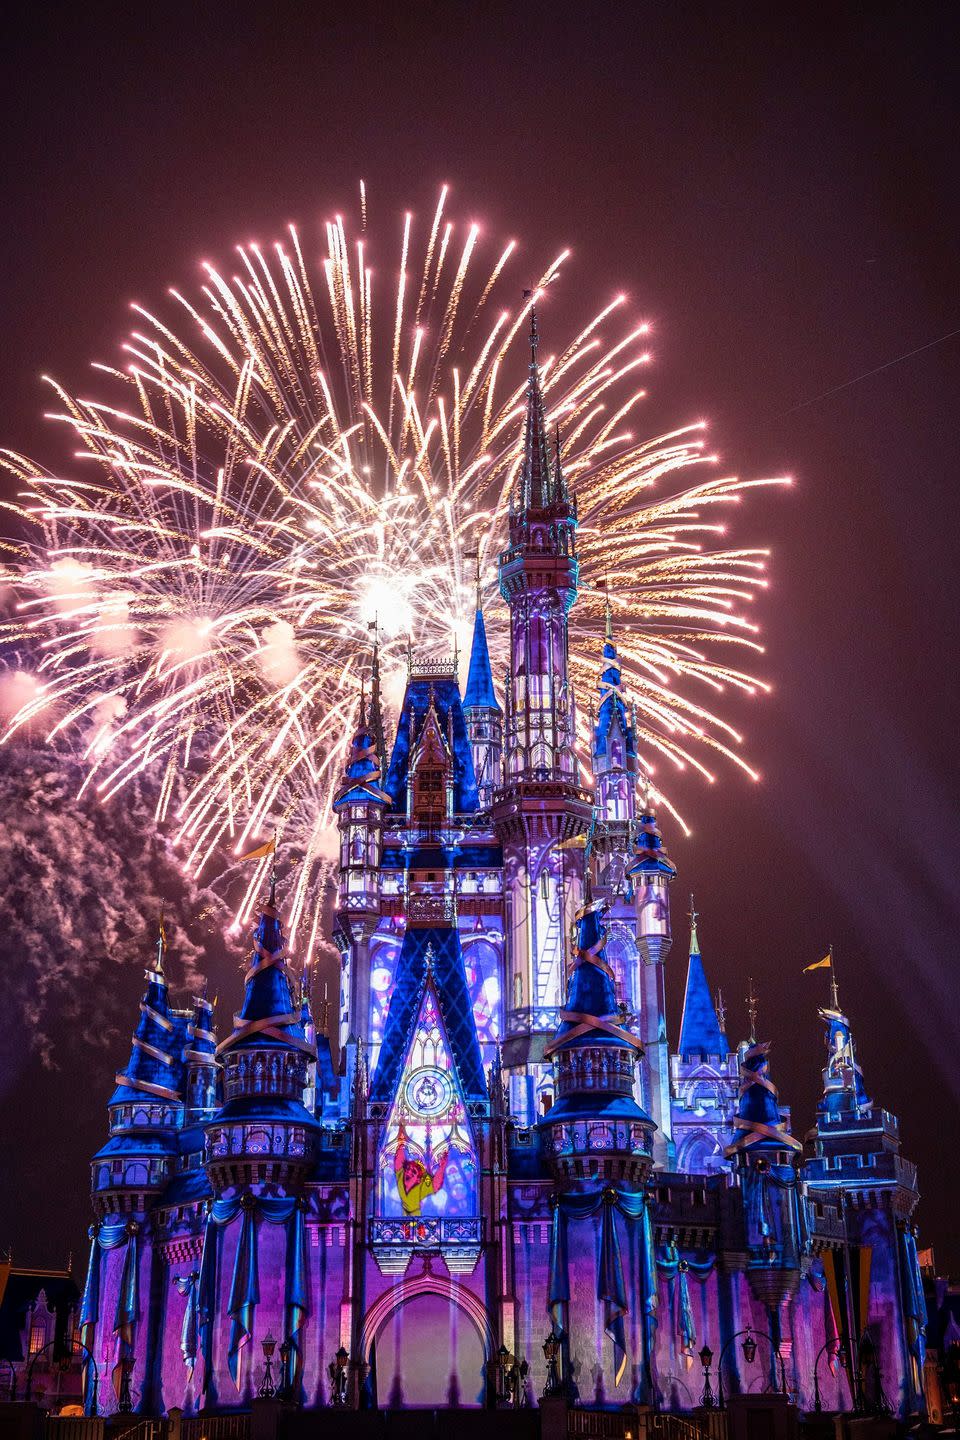 happily ever after presented by pandora jewelry lights up magic kingdom park in lake buena vista, fla with fireworks, lasers, lighting and projection effects featuring a story that captures the heart, humor and heroism of favorite disney films